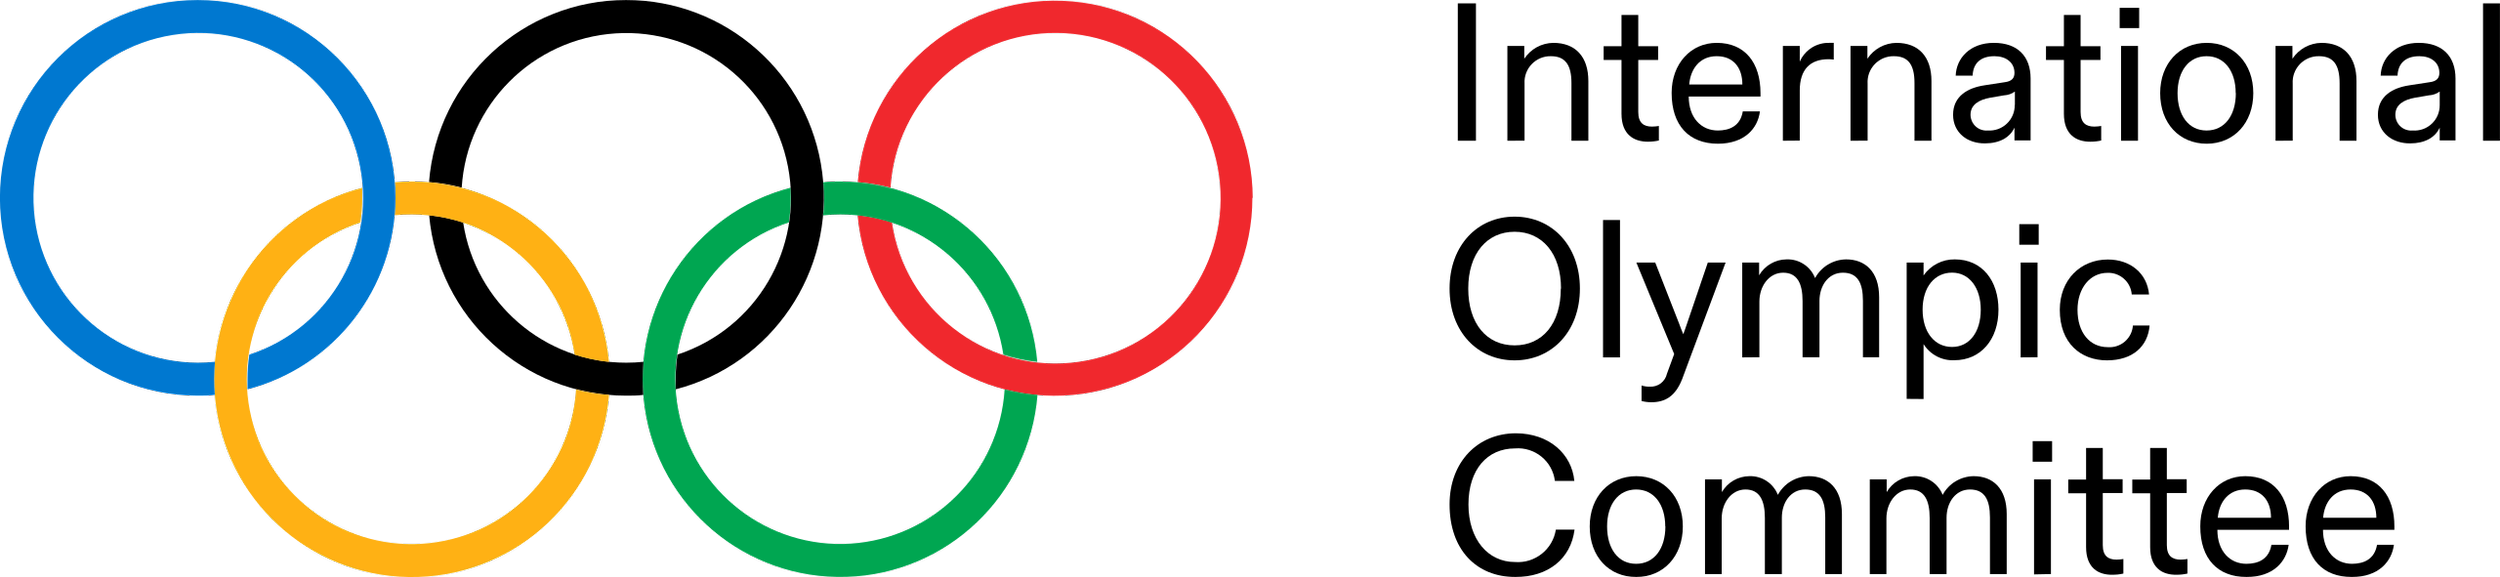 International_Olympic_Committee_logo_2021.svg.png